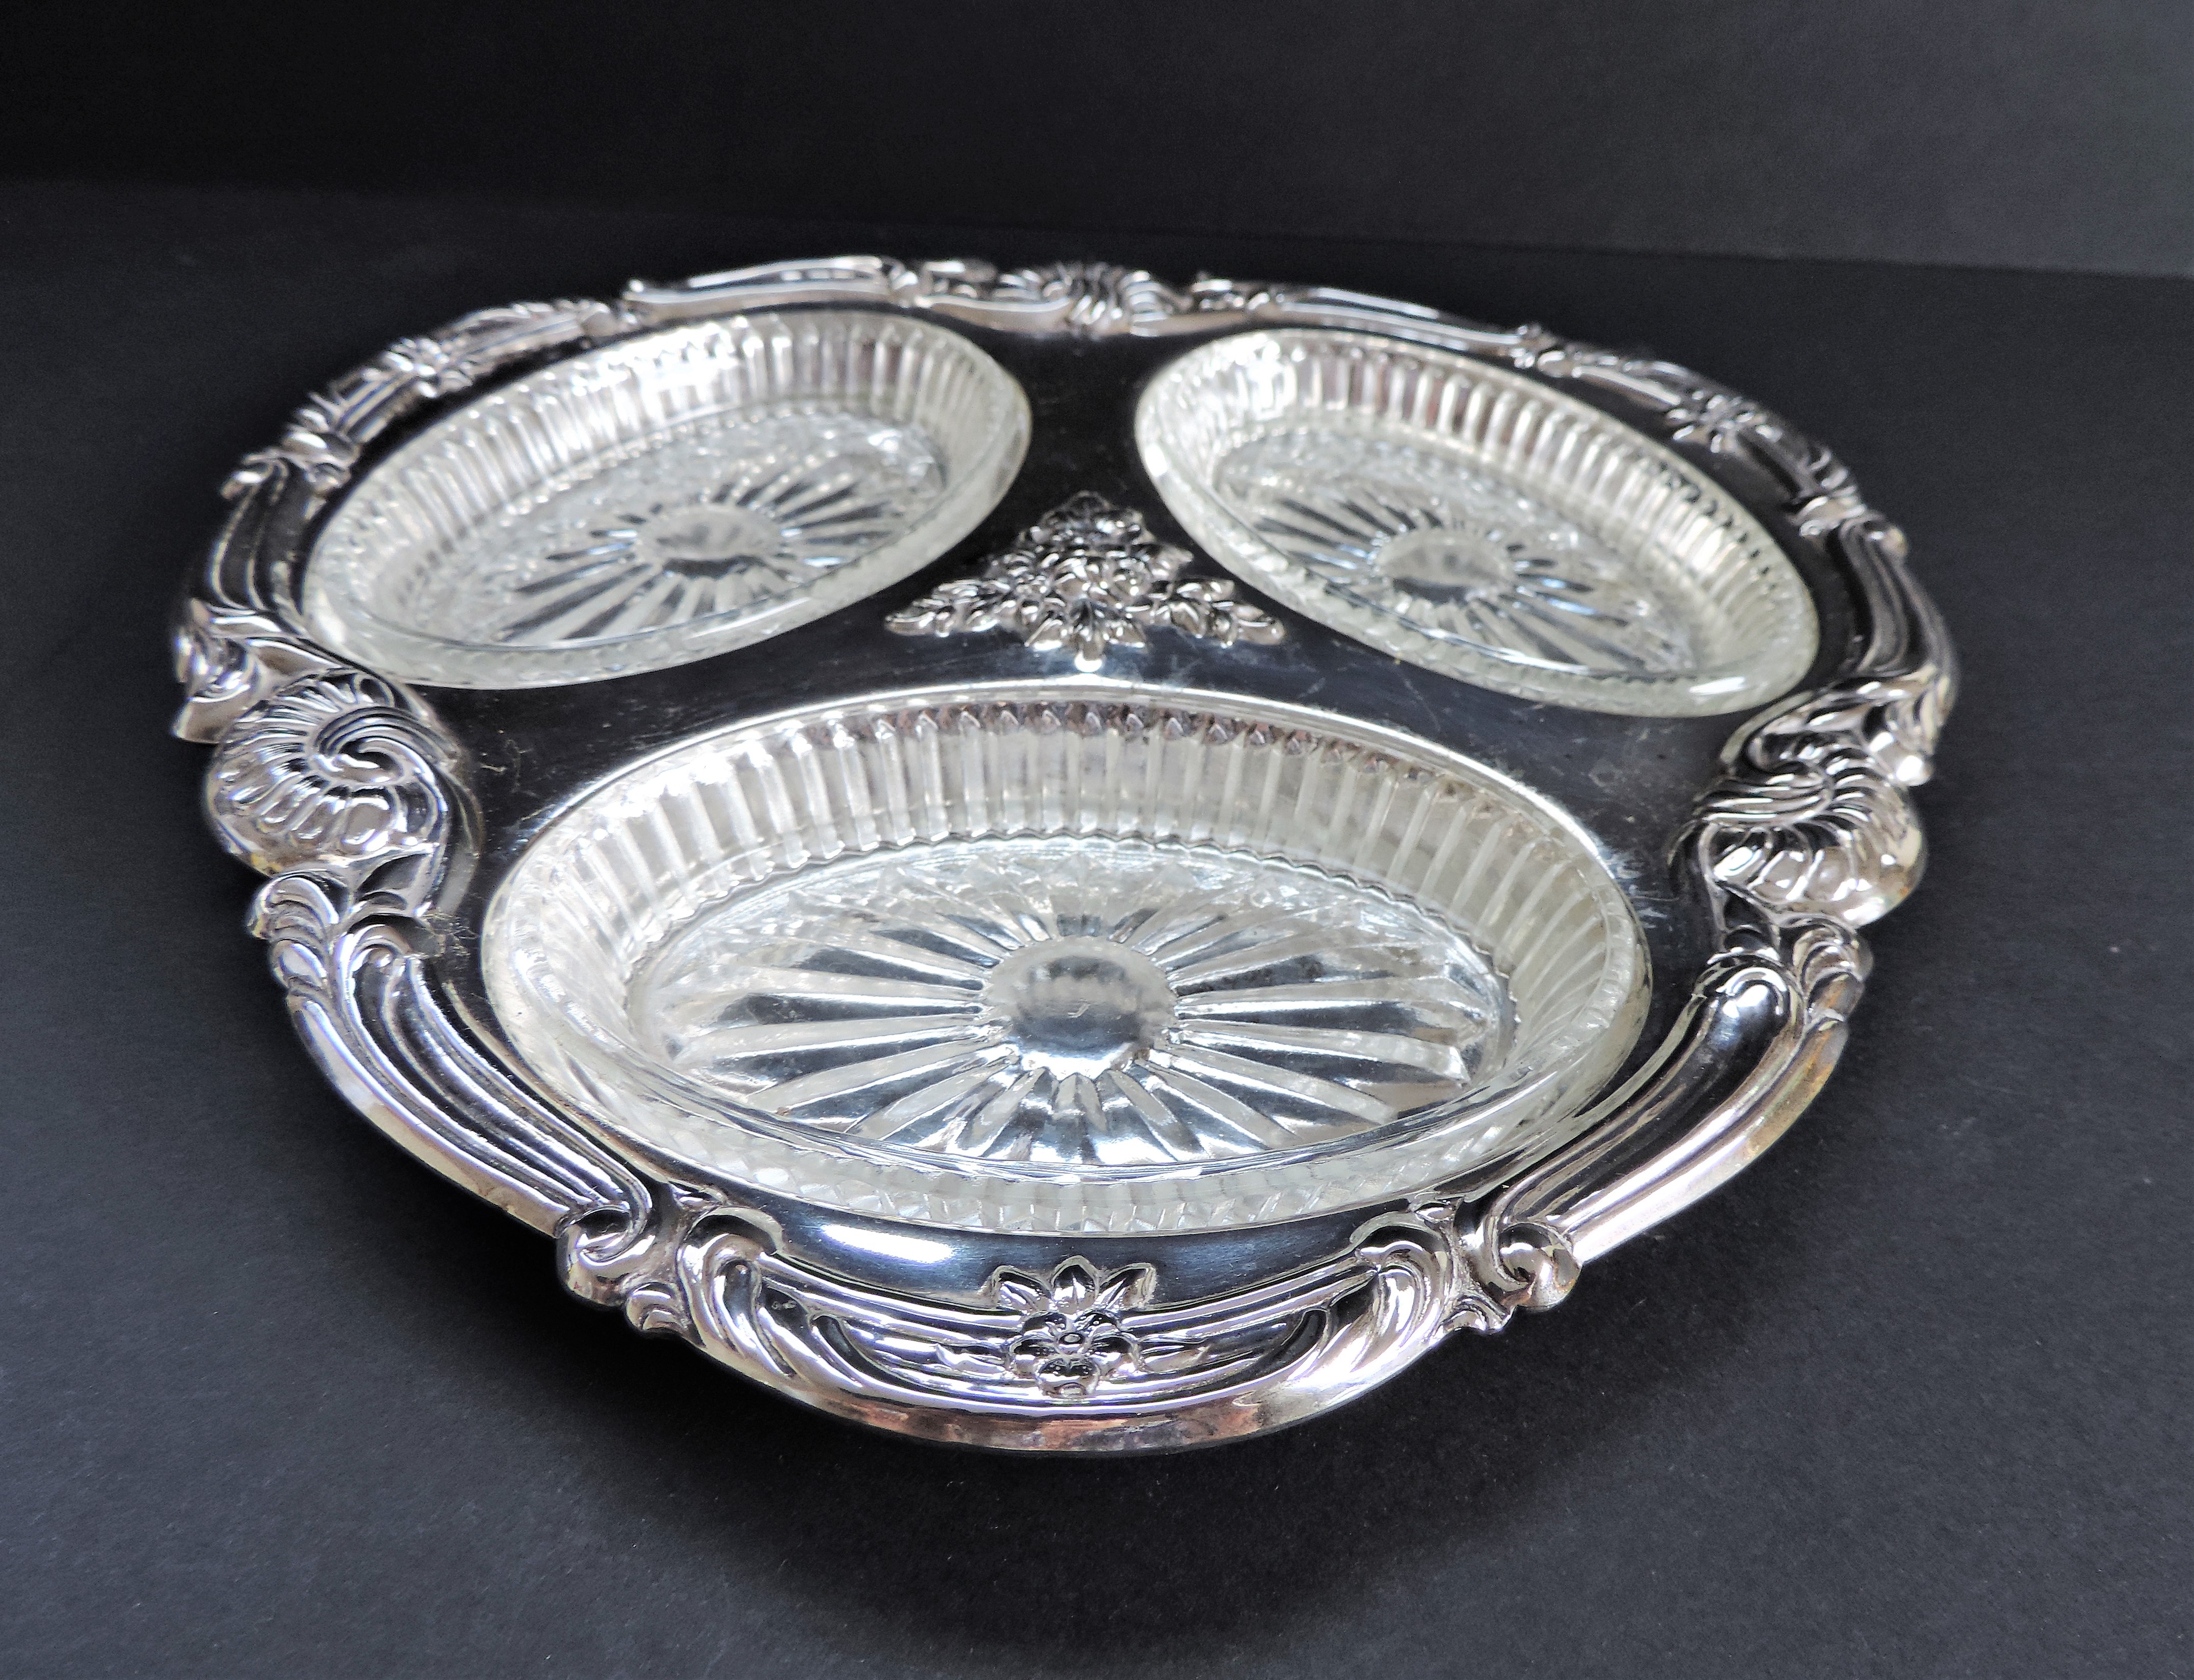 Vintage Silver Plate Hors d'oeuvres Serving Dish - Image 2 of 4